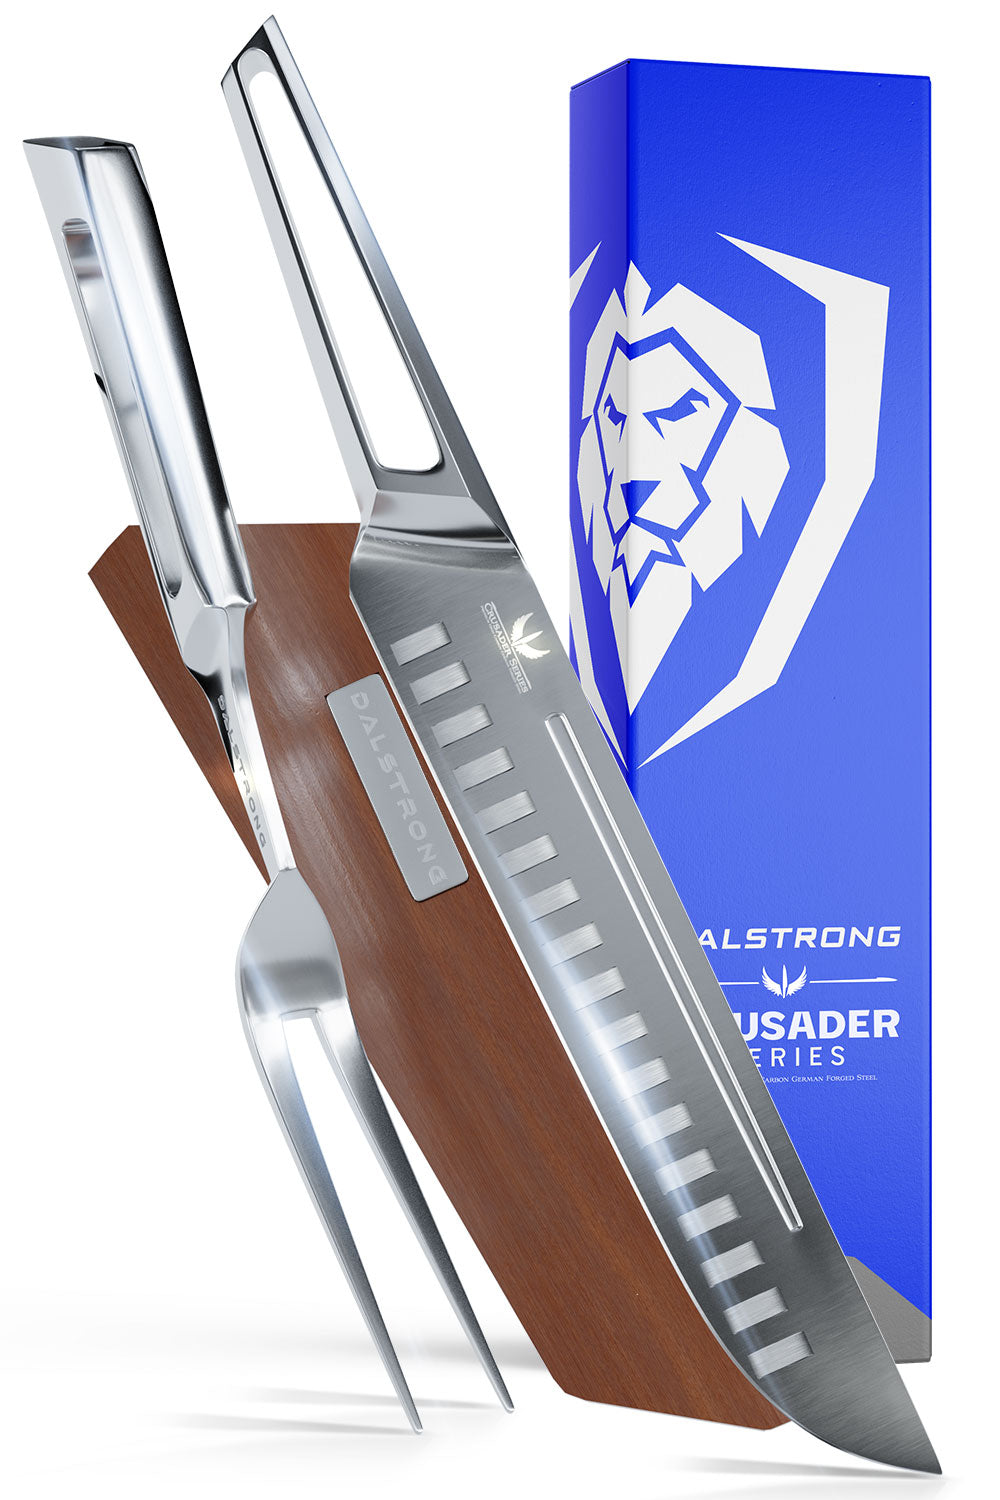 Dalstrong crusader series carving and fork set in front of it's premium packaging.